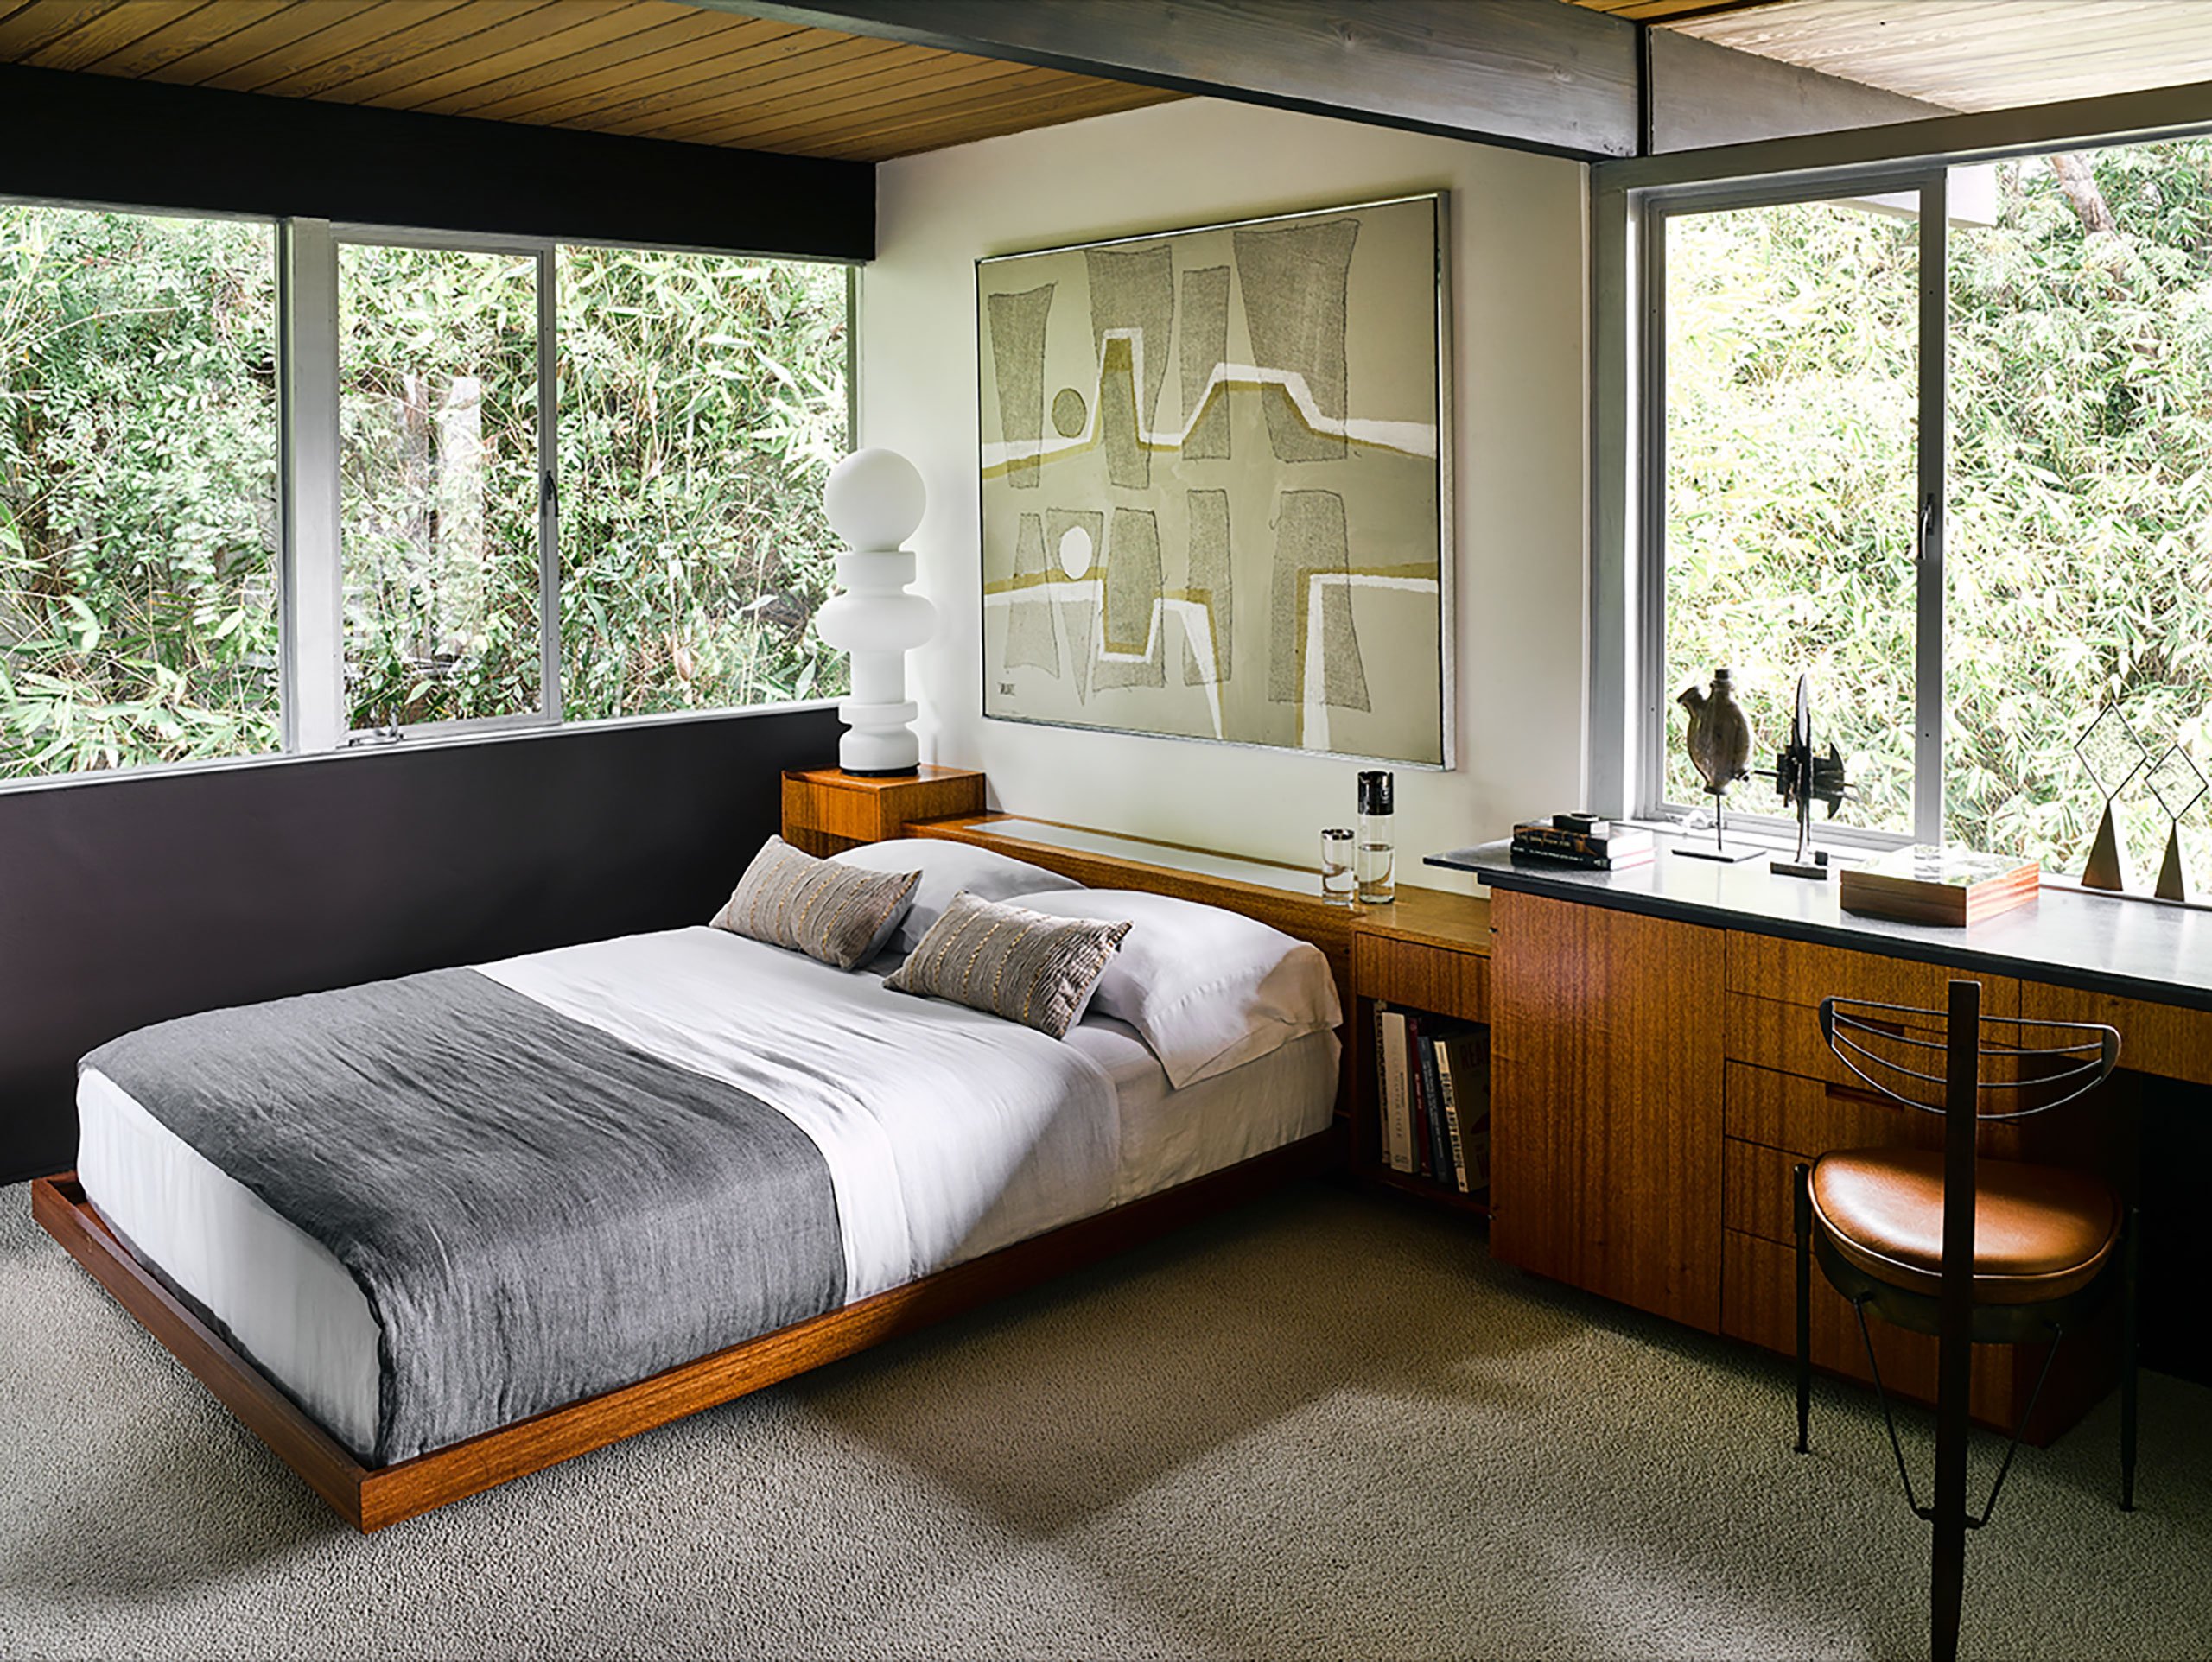 Photography by Douglas Friedman.
Featured: Built-in bed and desk by Richard Neutra; totem-like lamp by Bobo Piccoli for Fontana Arte; three-legged chair by Pedro Useche.